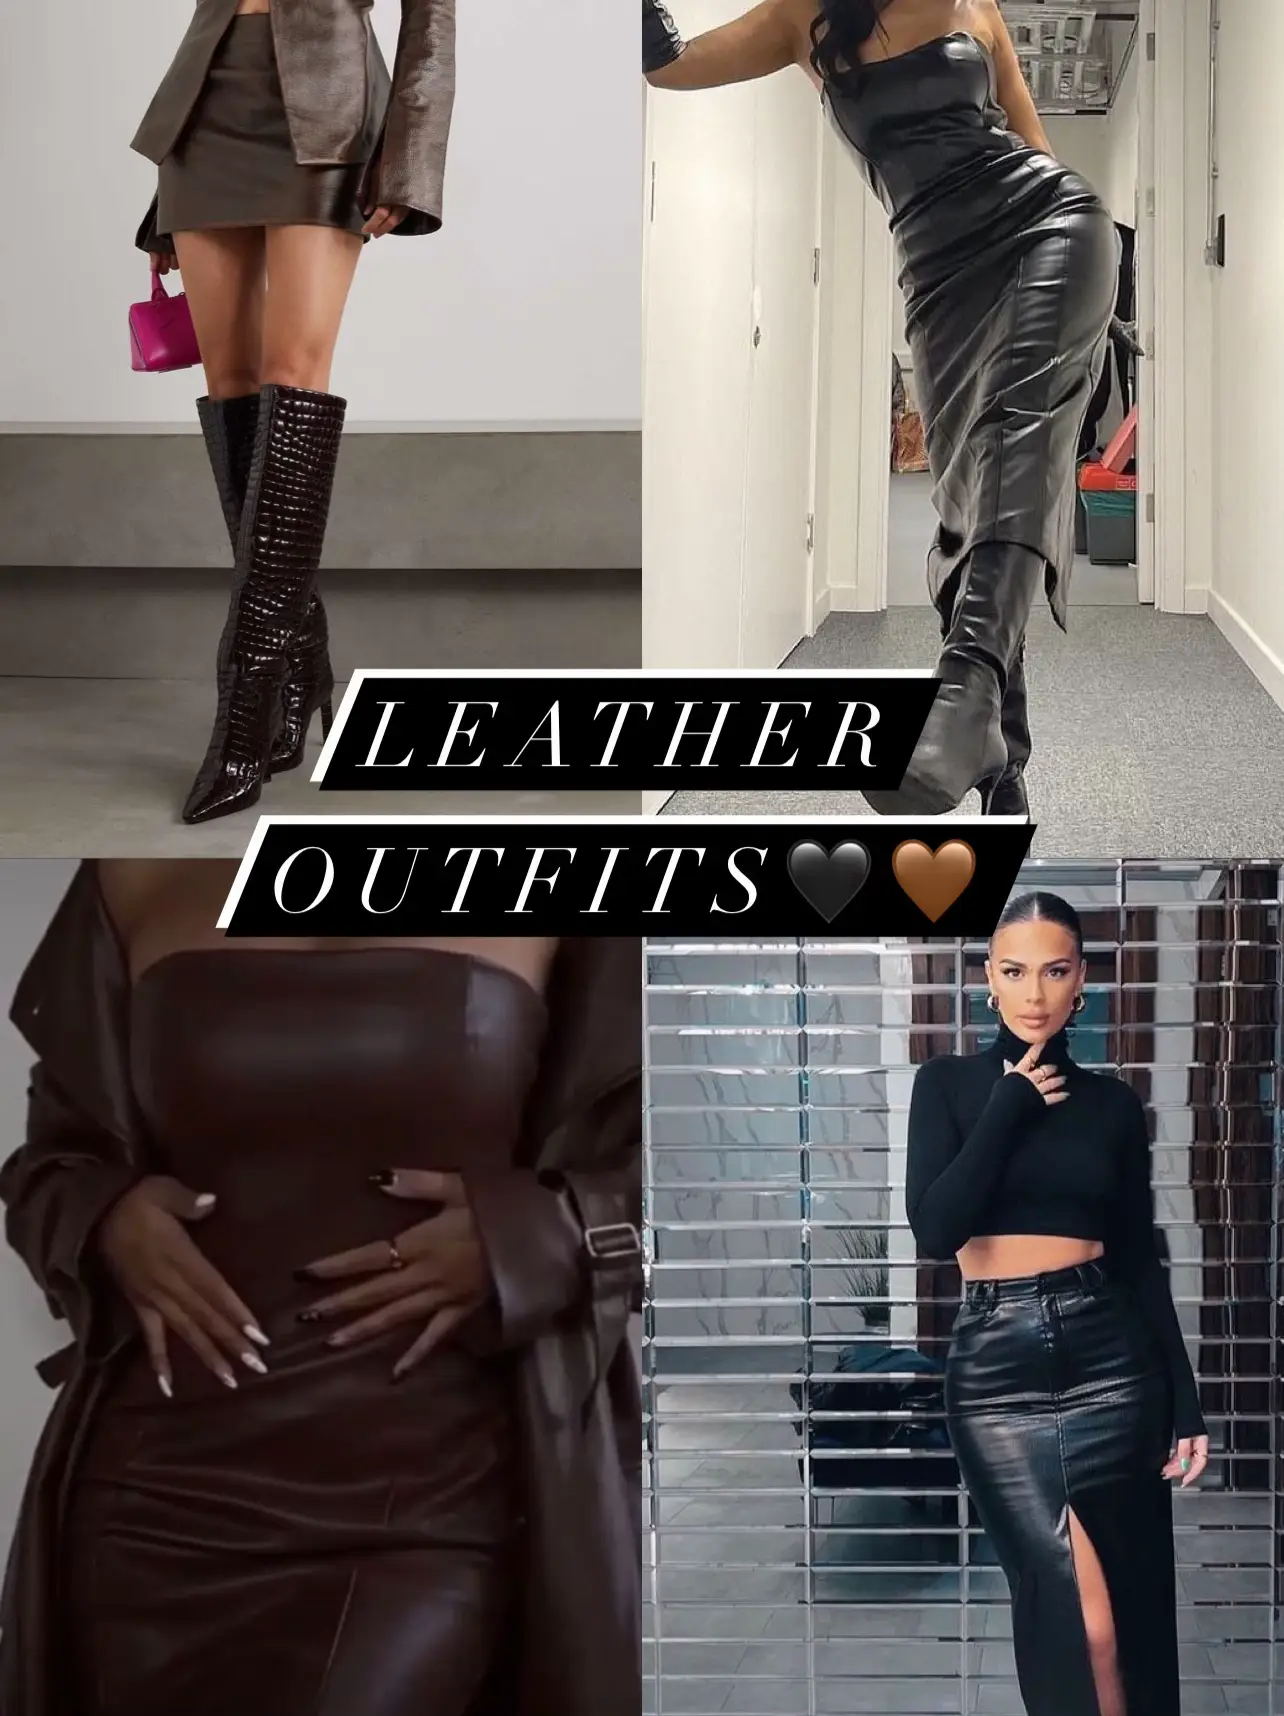 23 Cool Leather Outfit Ideas to Try in 2022